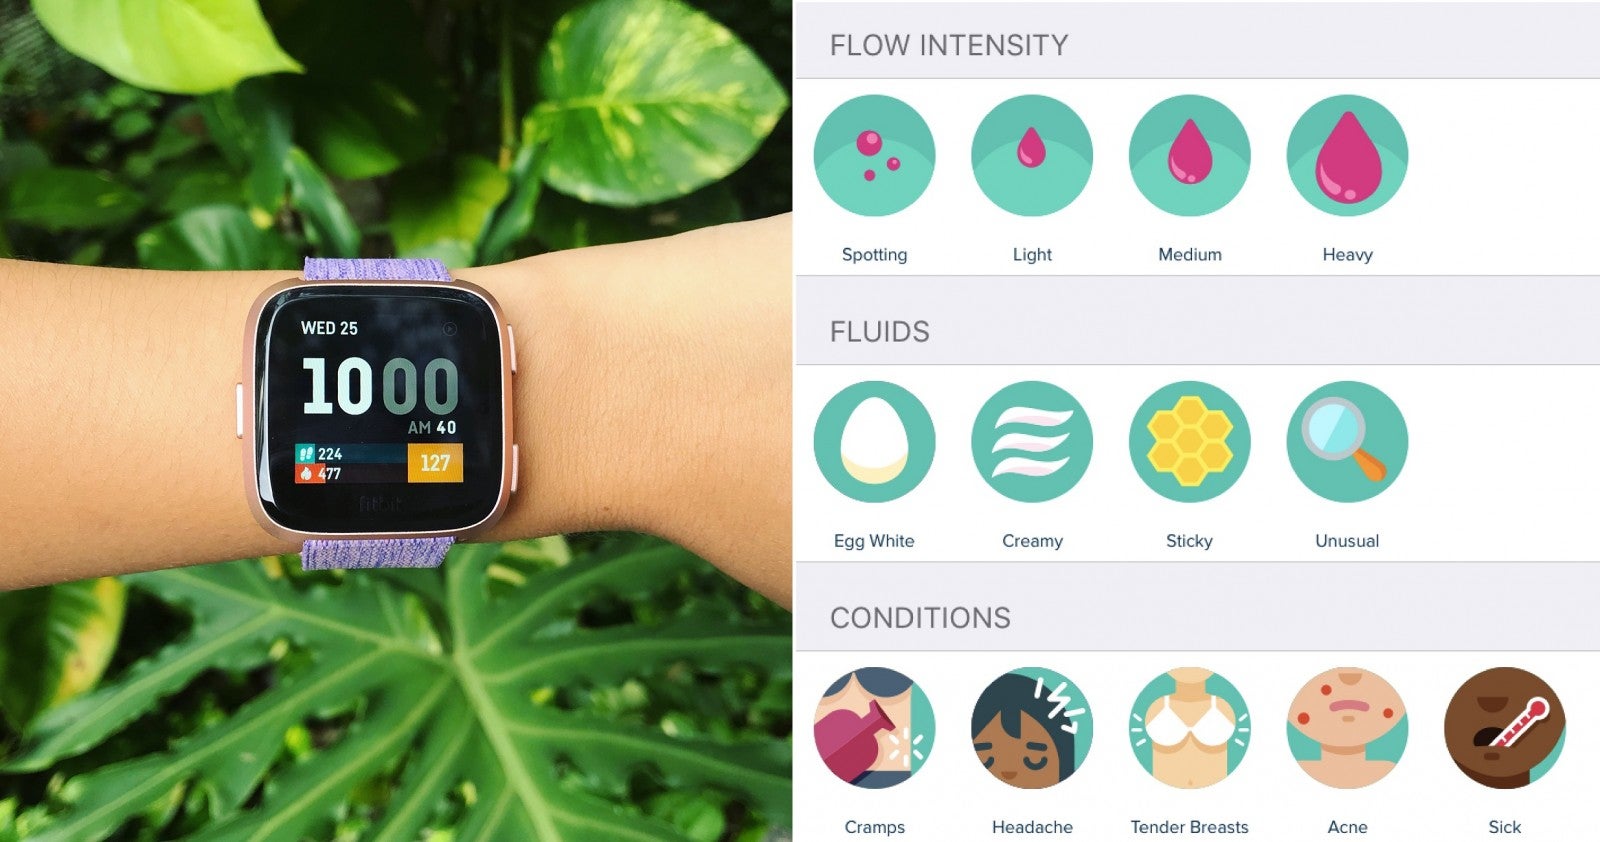 Period-Tracking & 6 Other Features We Love About This New Smartwatch - WORLD OF BUZZ 24